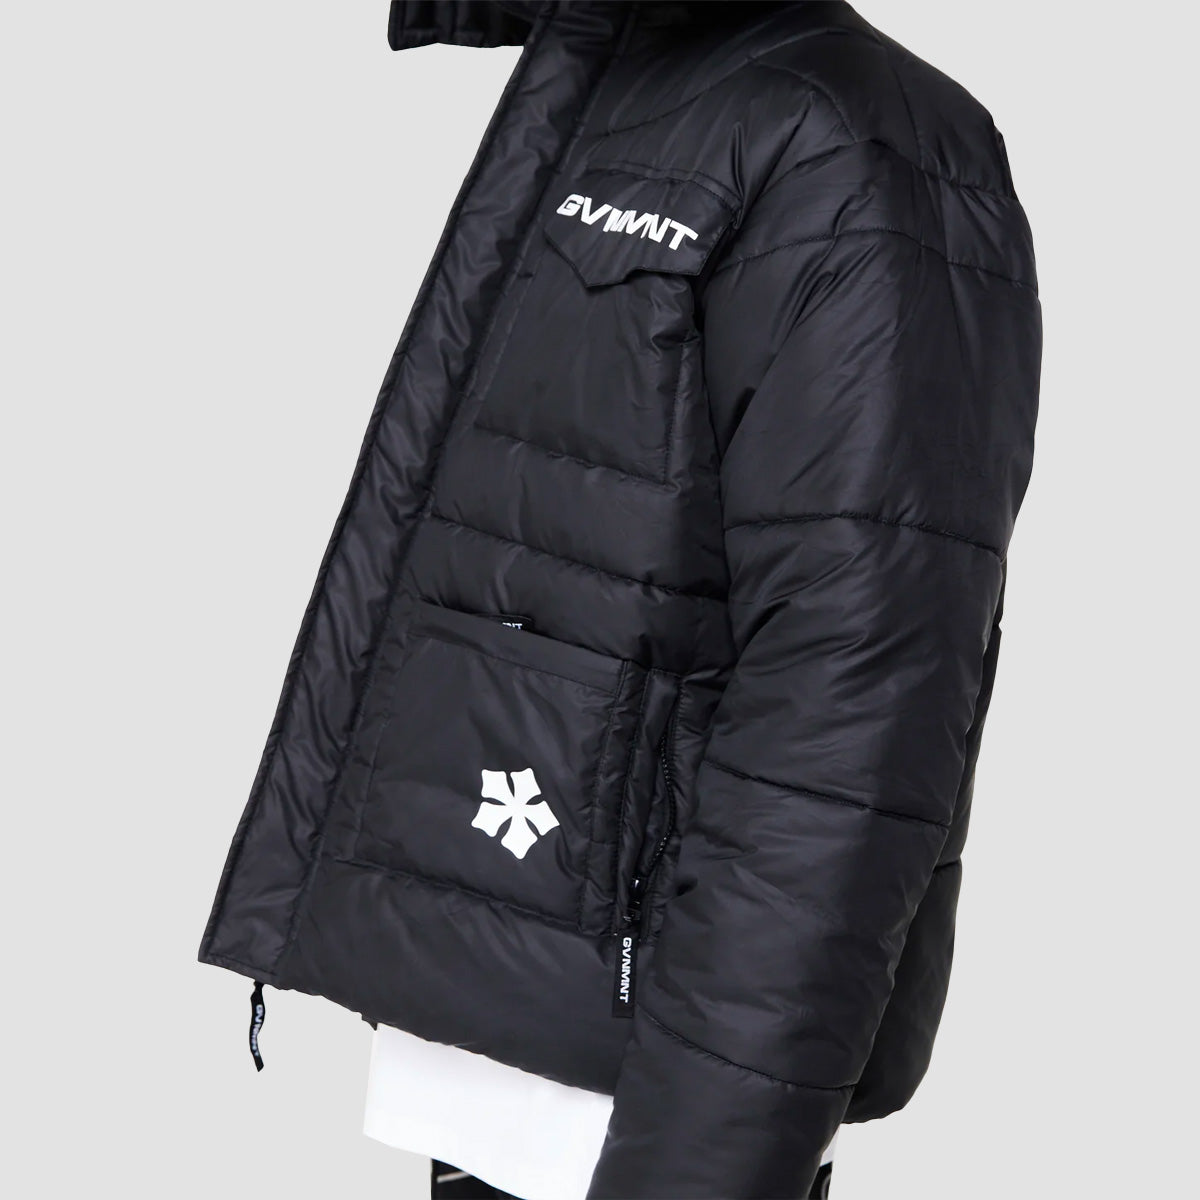 GVNMNT Armored 2 in 1 Puffer Jacket Black